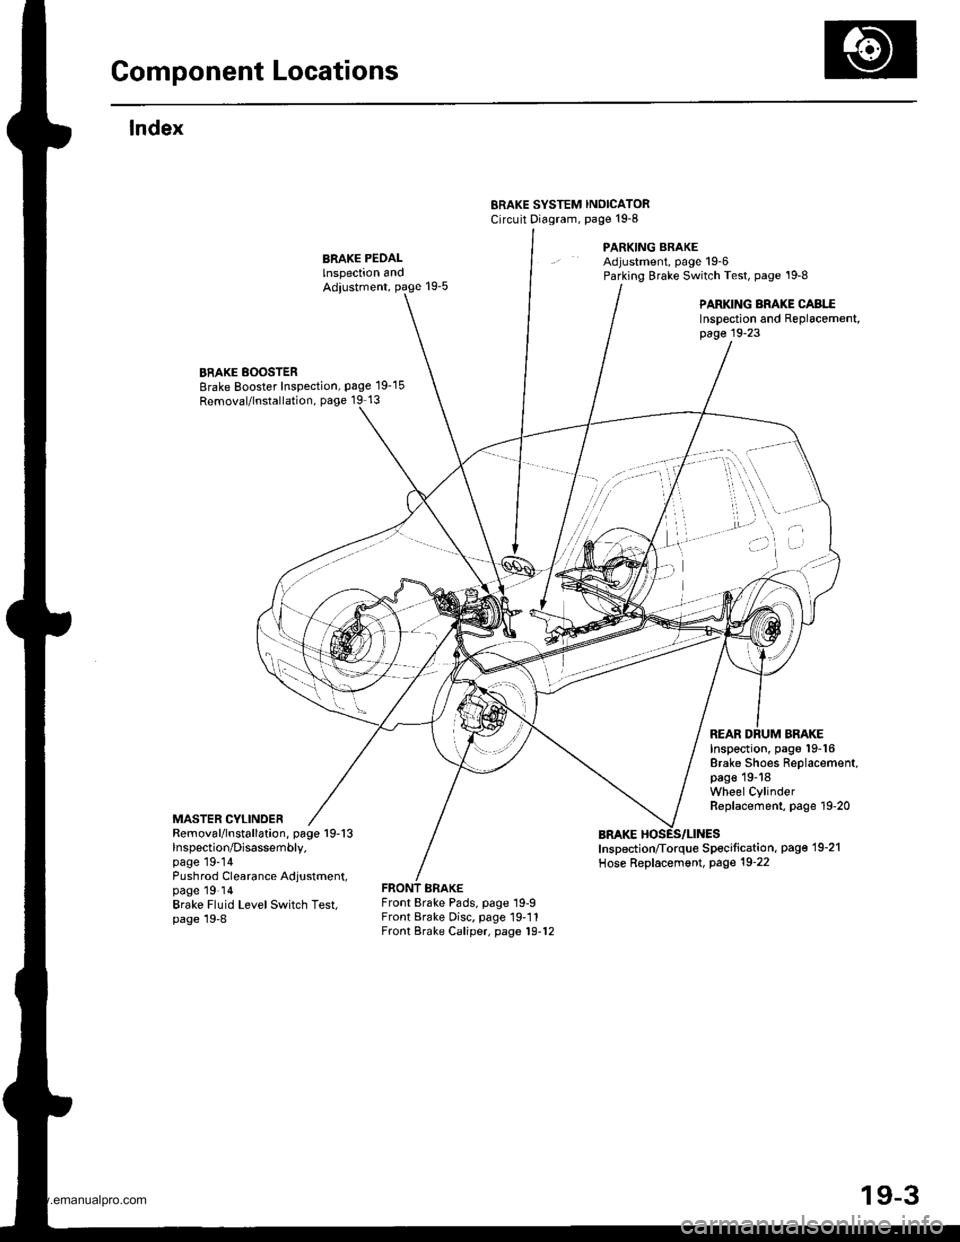 HONDA CR-V 1998 RD1-RD3 / 1.G User Guide 
Gomponent Locations
lndex
ERAKE SYSTEM INOICATORCircuit Diagram, paget9-8
PARKING BRAKEAdjustment, page 19-6Parking Brake Switch Test, page 19-8
PARKING BRAKE CABI..EInspection and Replacement,page